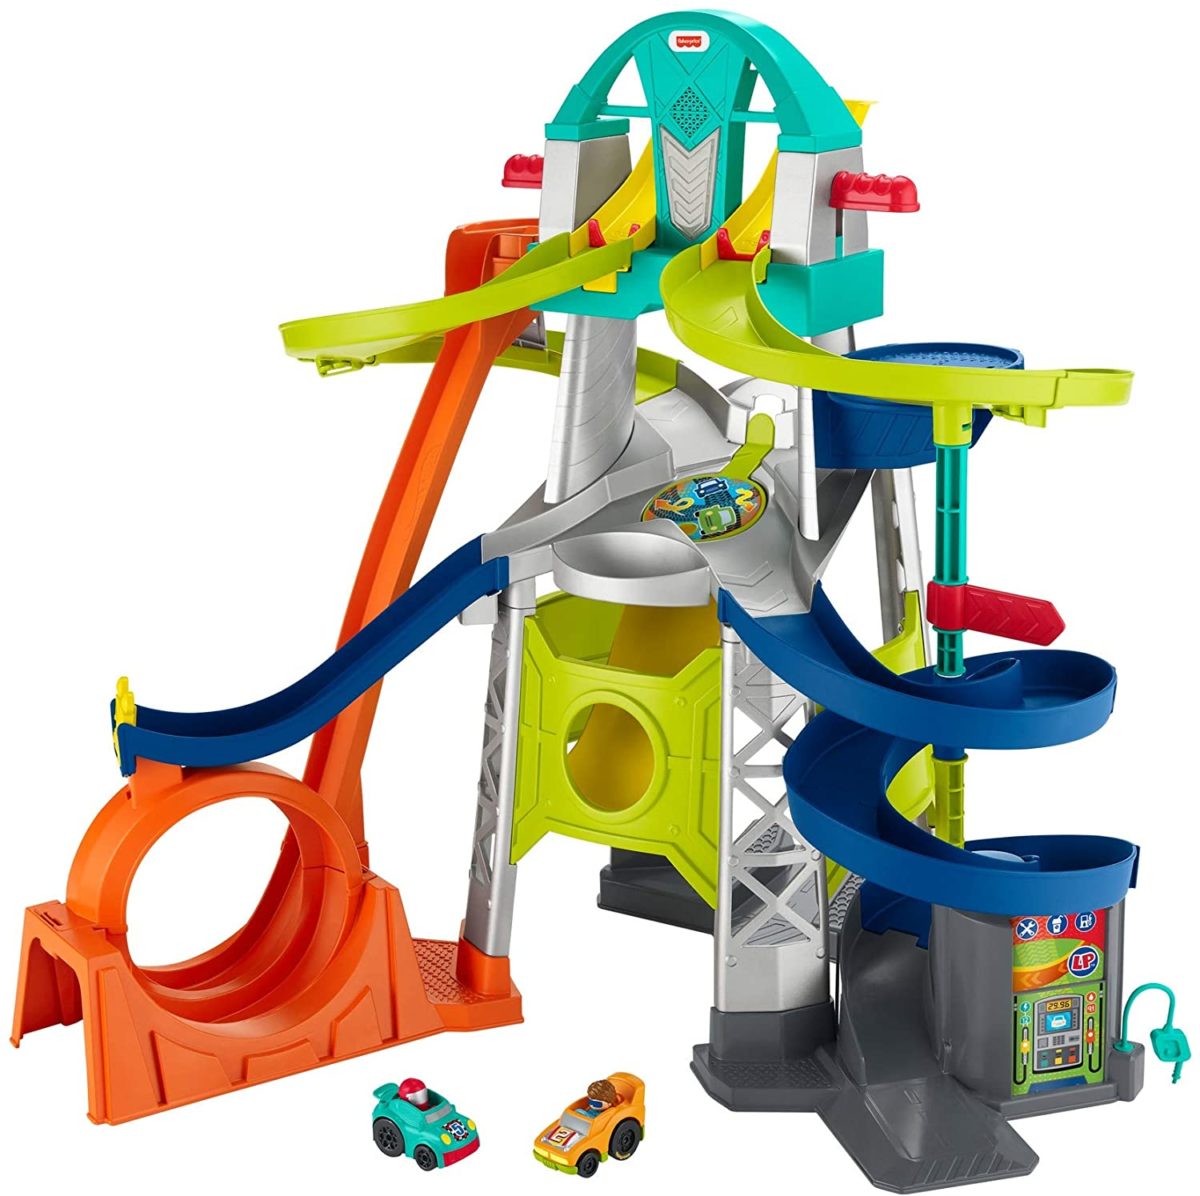 top quality fisher-price toys that come highly-rated, educational, and entertaining that you can buy for your little ones right now on amazon